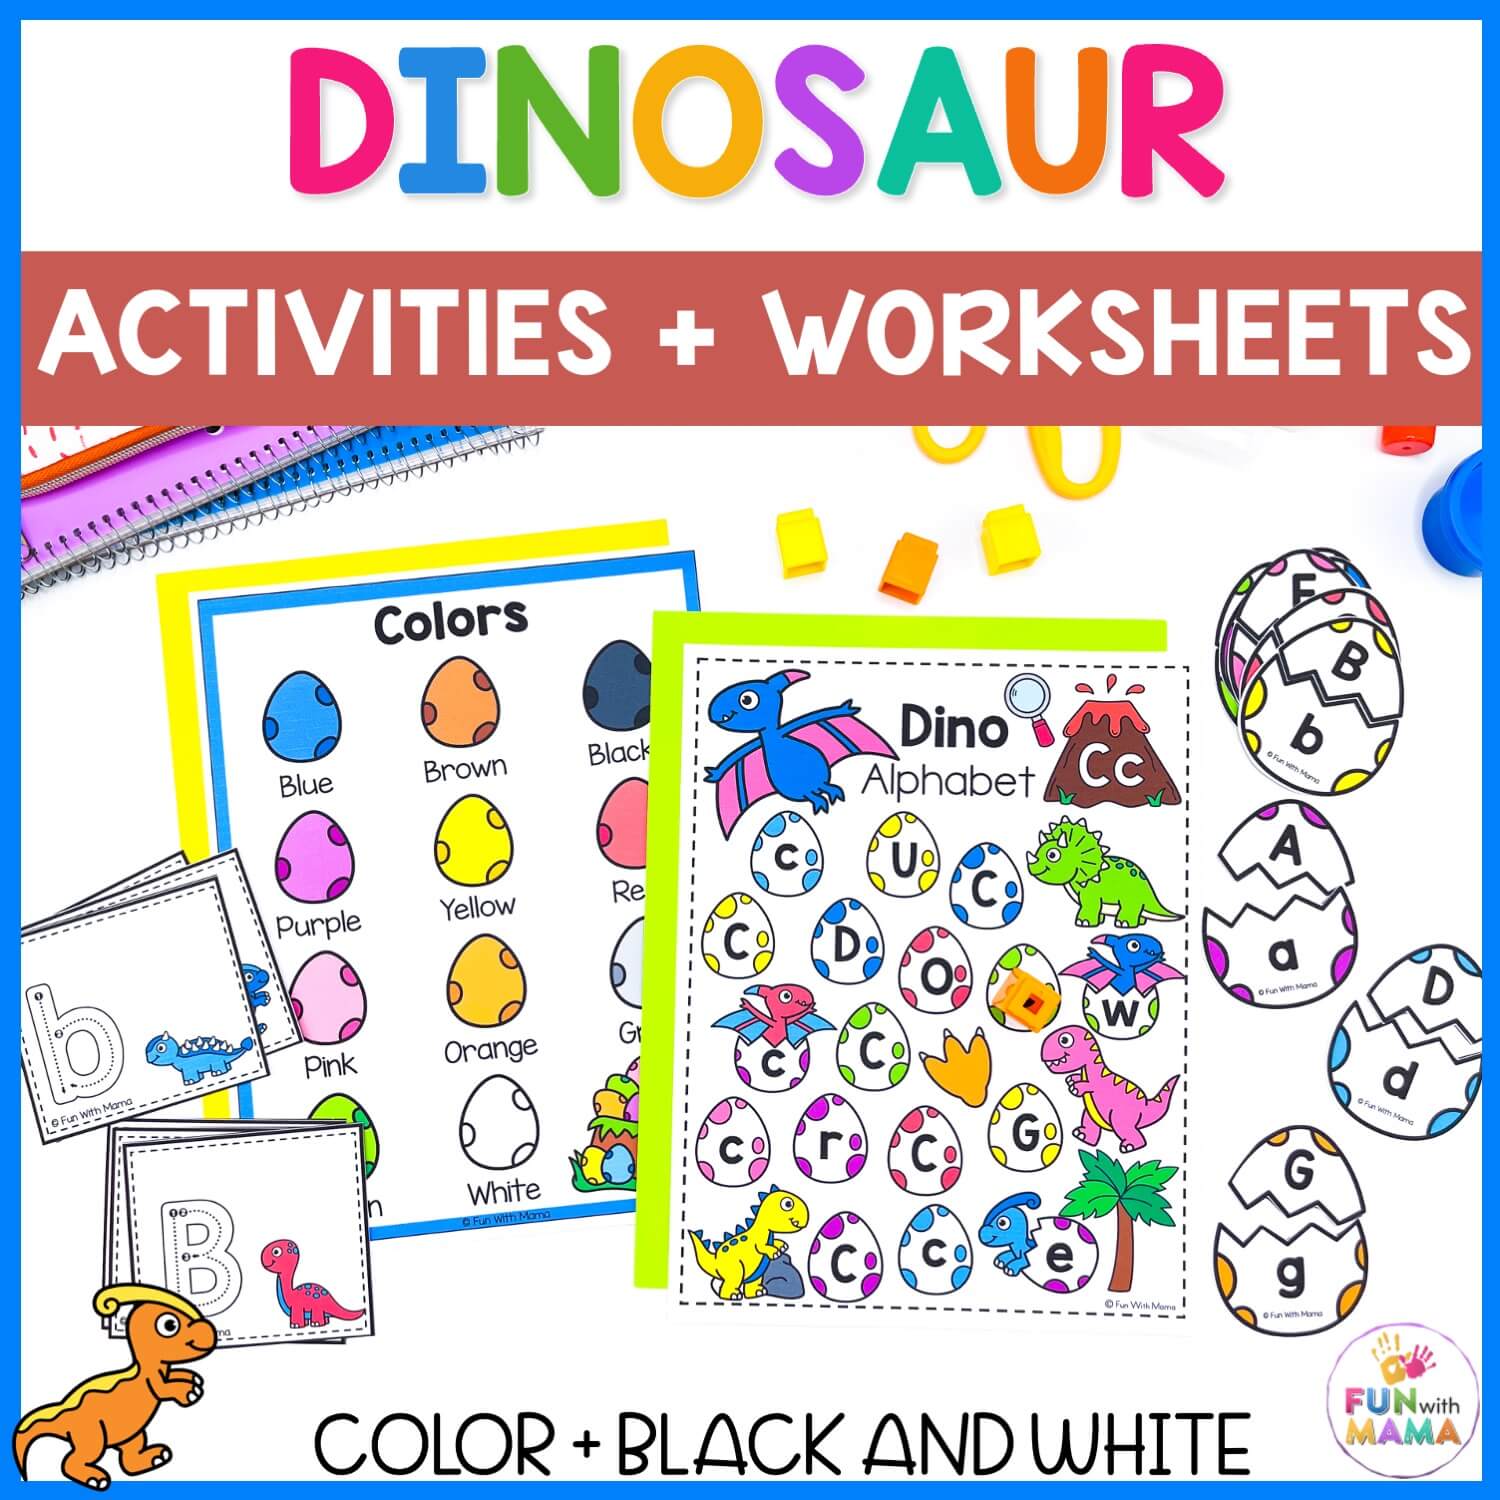 dinosaur activities and worksheets